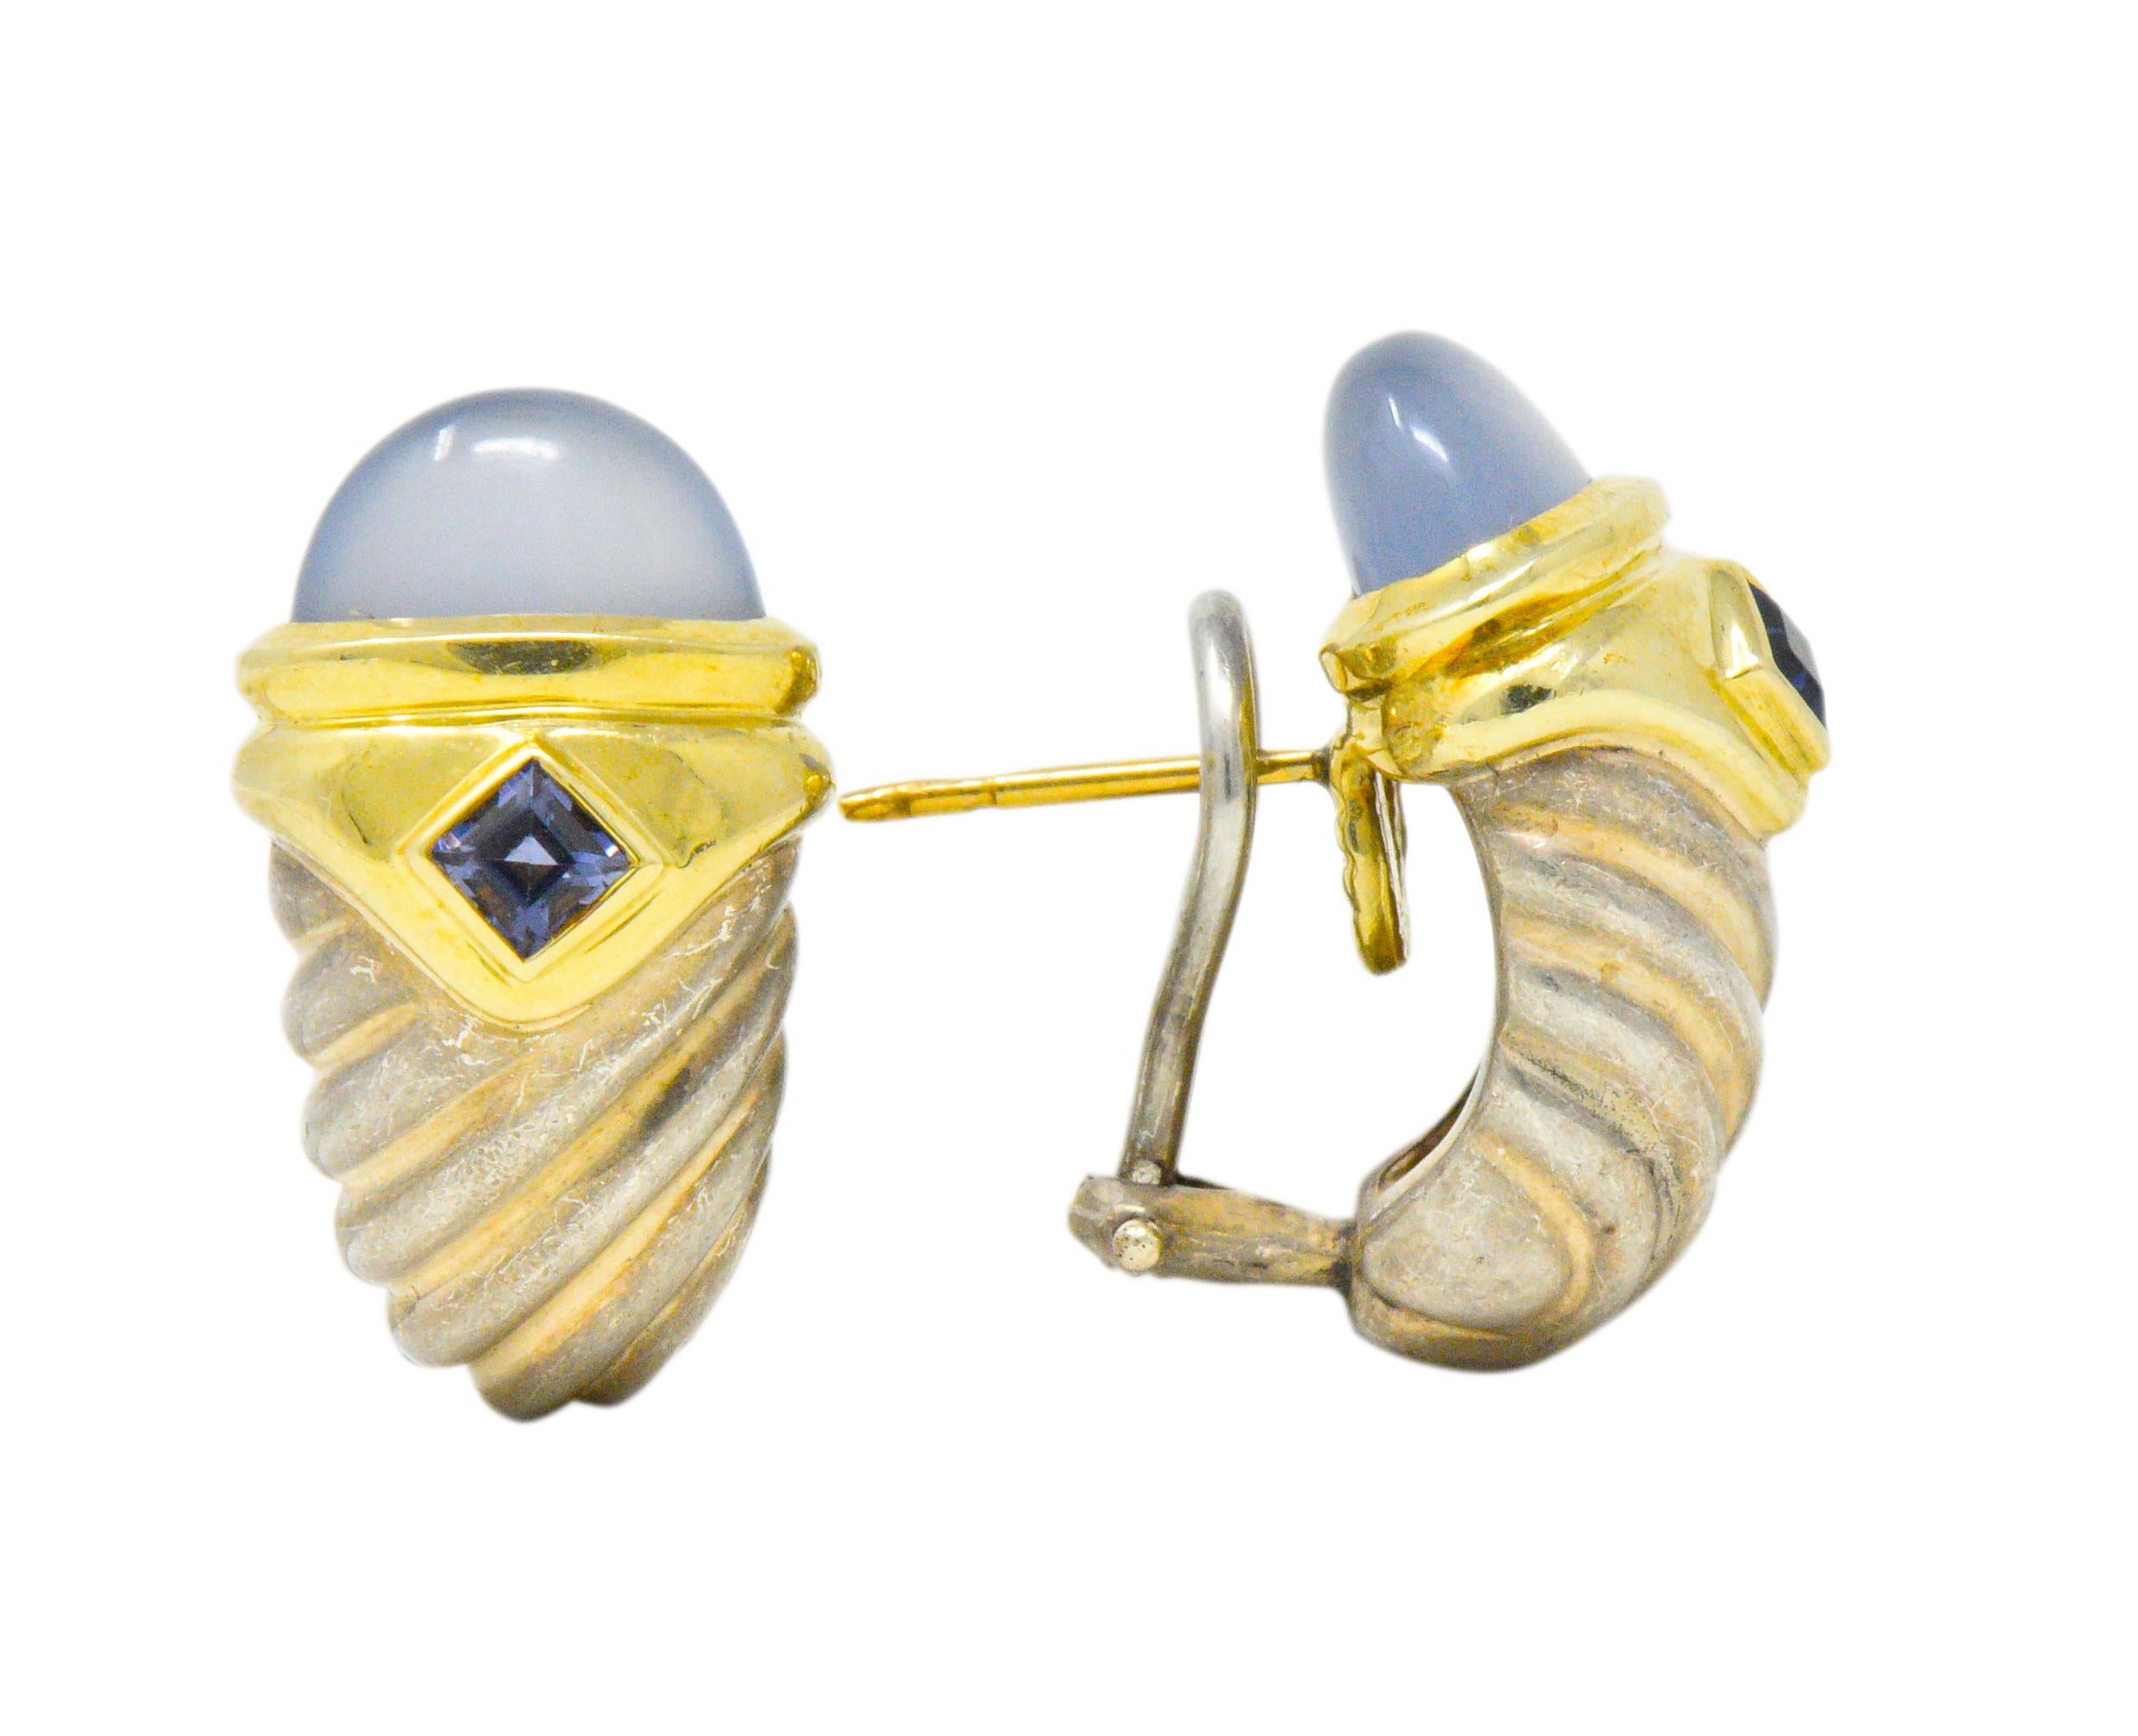 Each featuring milky cabochon chalcedony and iolite bezel set in 14K yellow gold

Shrimp style earrings constructed of twisted sterling silver

Omega backs 

Measures: 22. 37 mm x 12.73 mm

Total Weight: 11.9 Grams

Stamped .925, 585 and D. Yurman